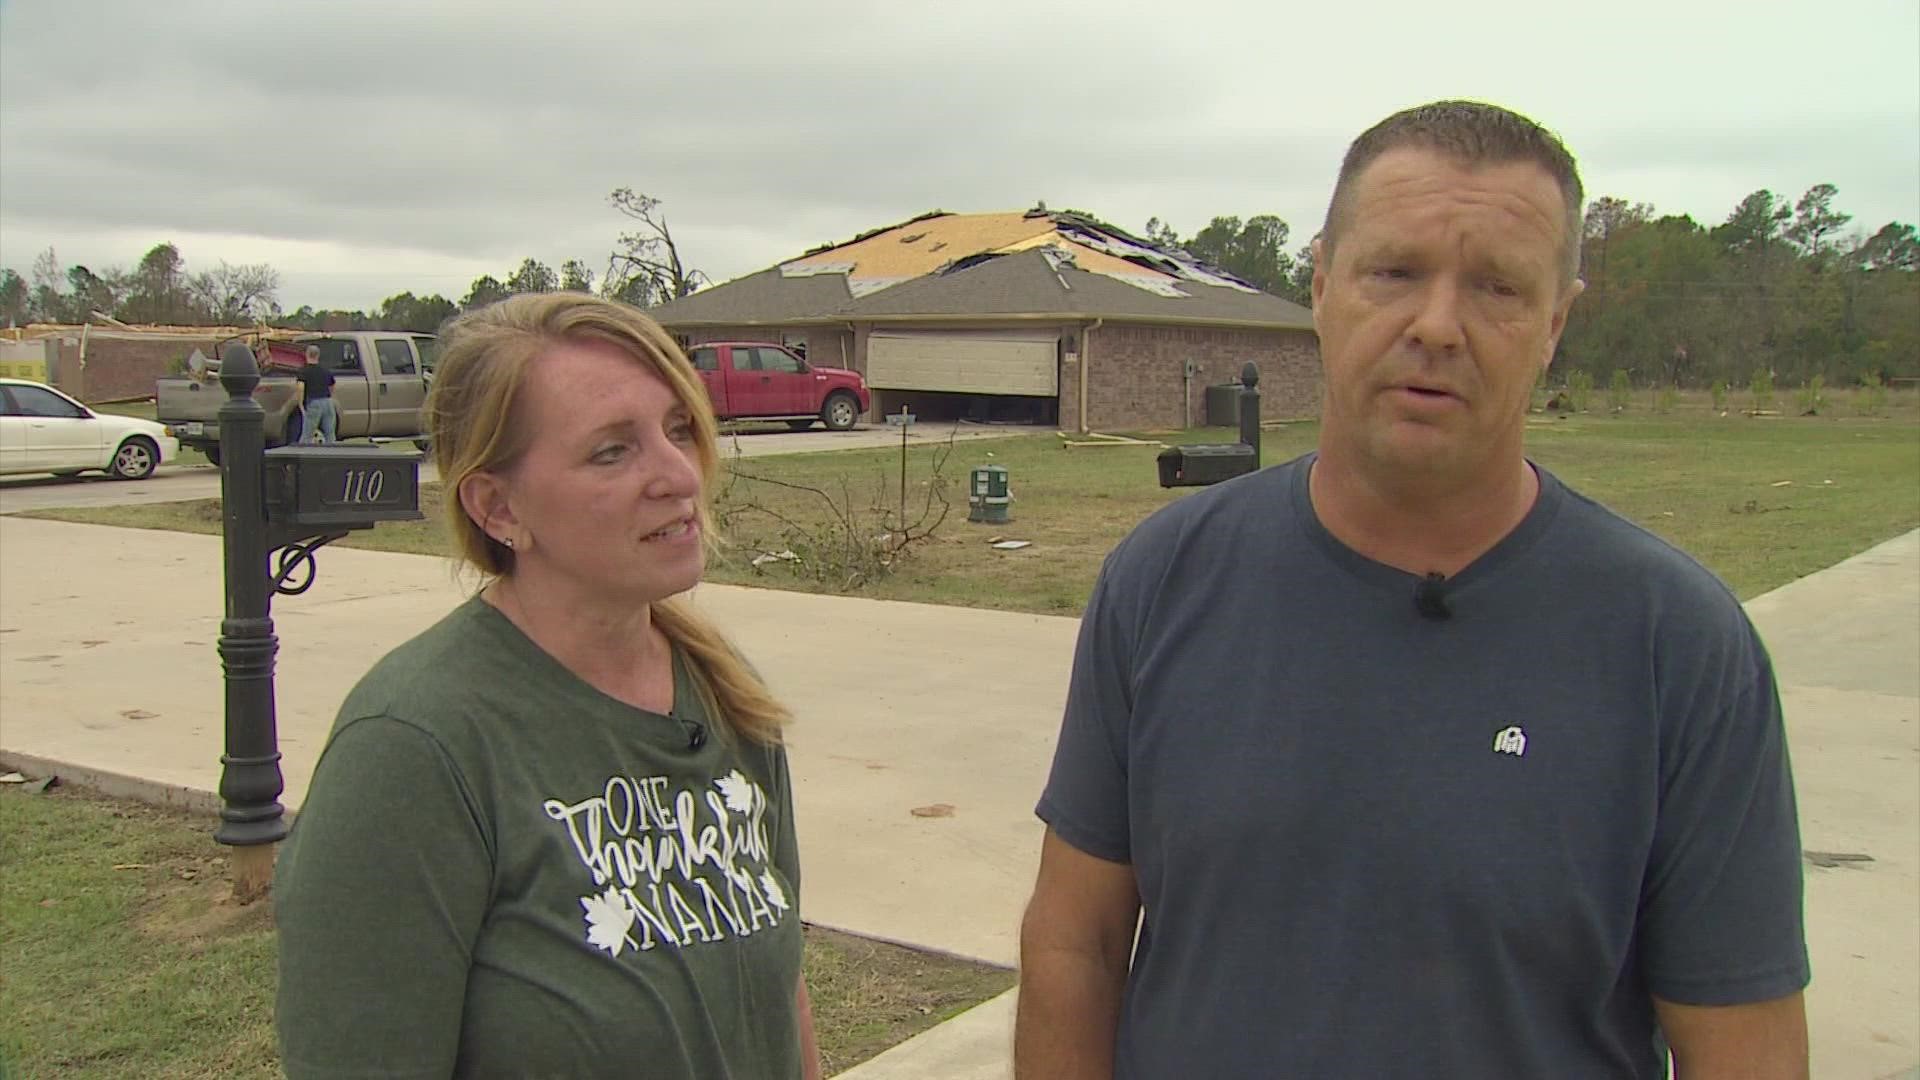 "We're just so grateful that everyone walked away because there's no reason they should have," said the Brannon family.